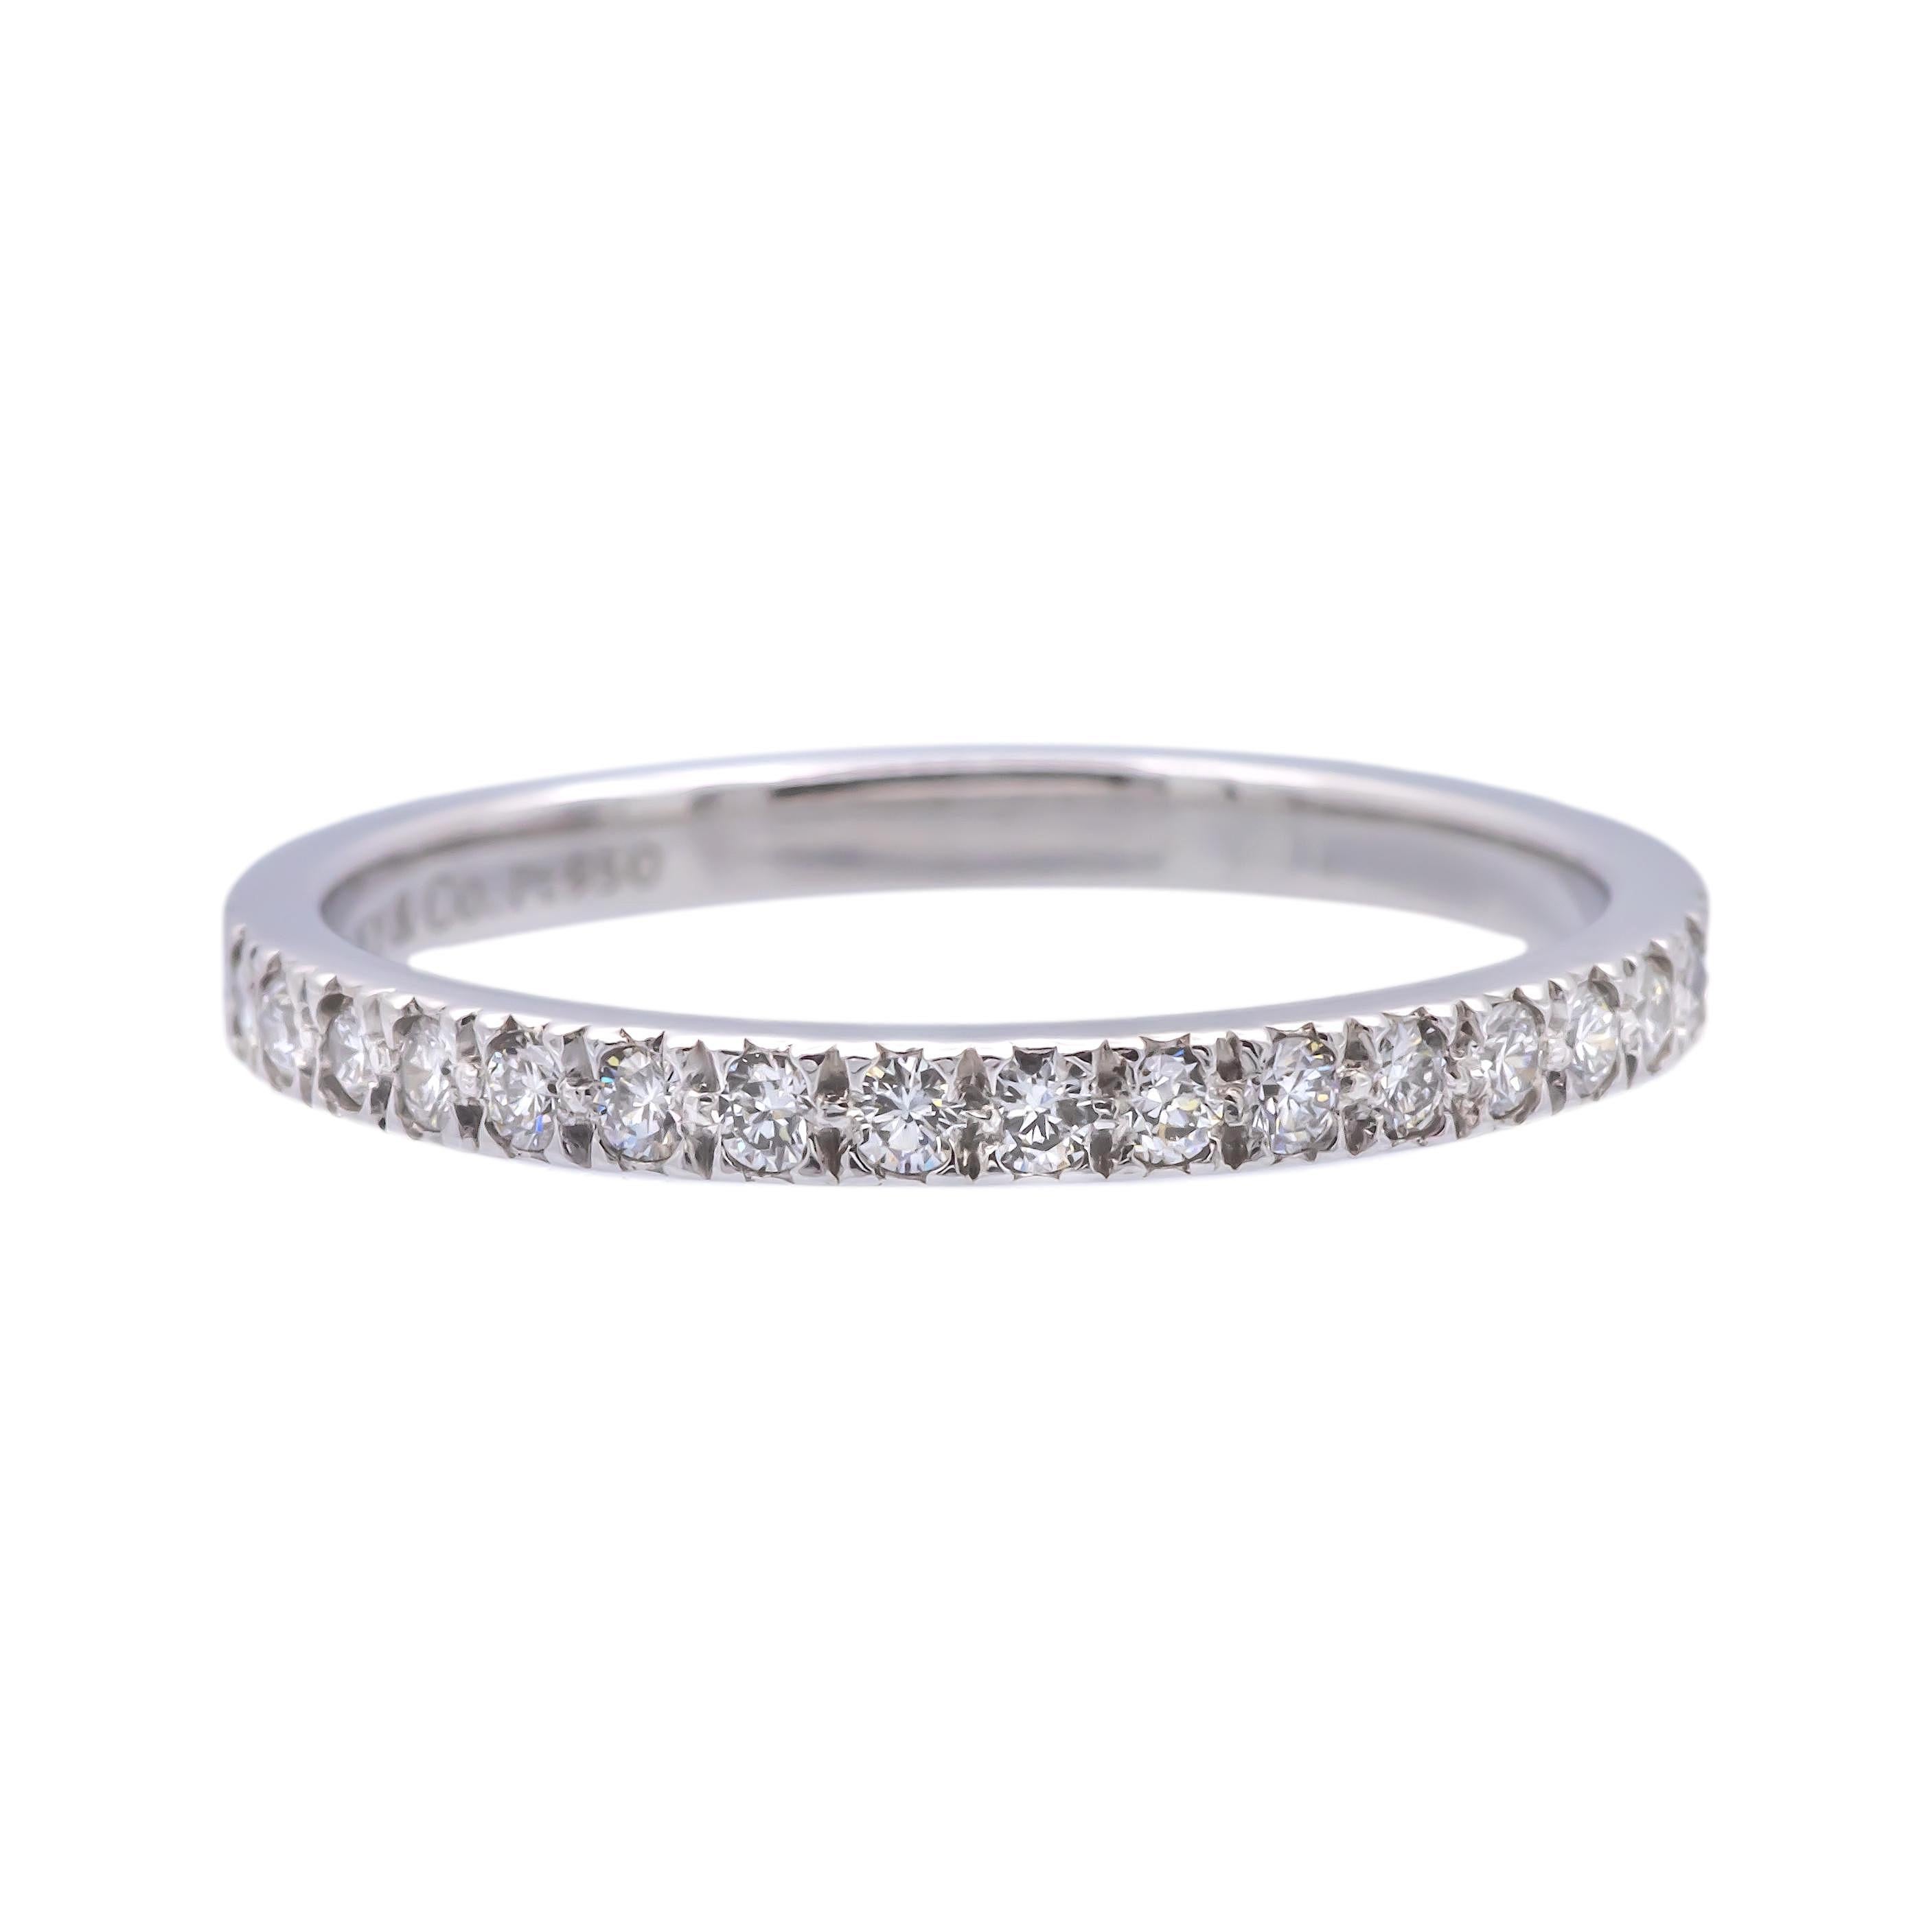 Tiffany & Co. Band ring from the Novo collection finely crafted in platinum featuring 16 round brilliant cut diamonds weighing 0.18 carats total weight approximately encrusted in bead setting going halfway around. Fully hallmarked with logo and